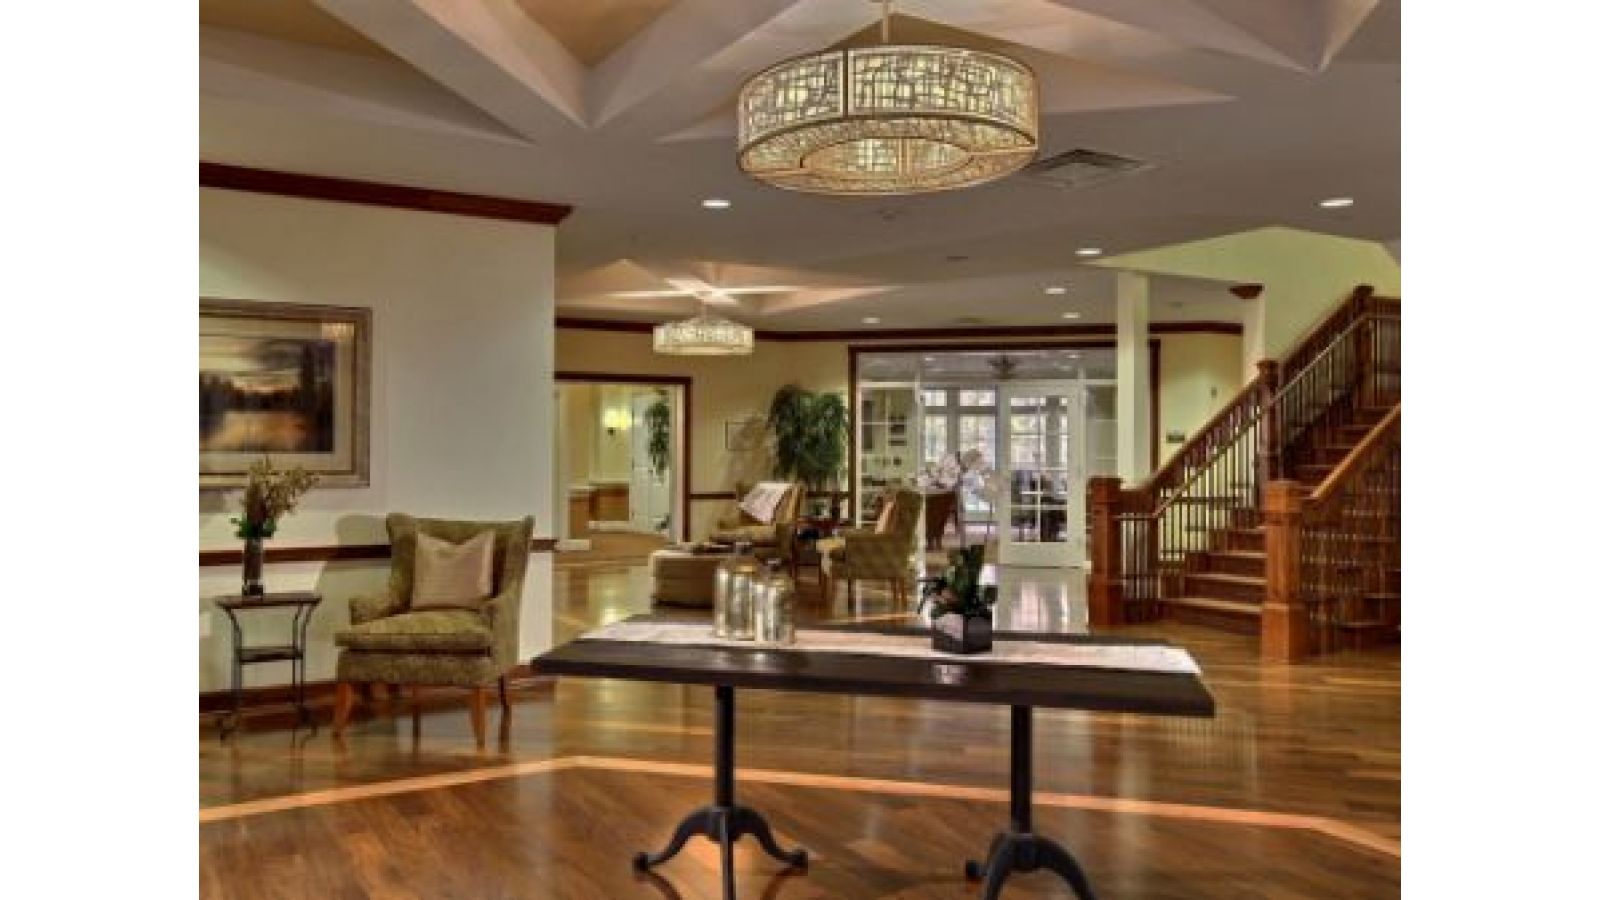 The Solana Olney Assisted Living